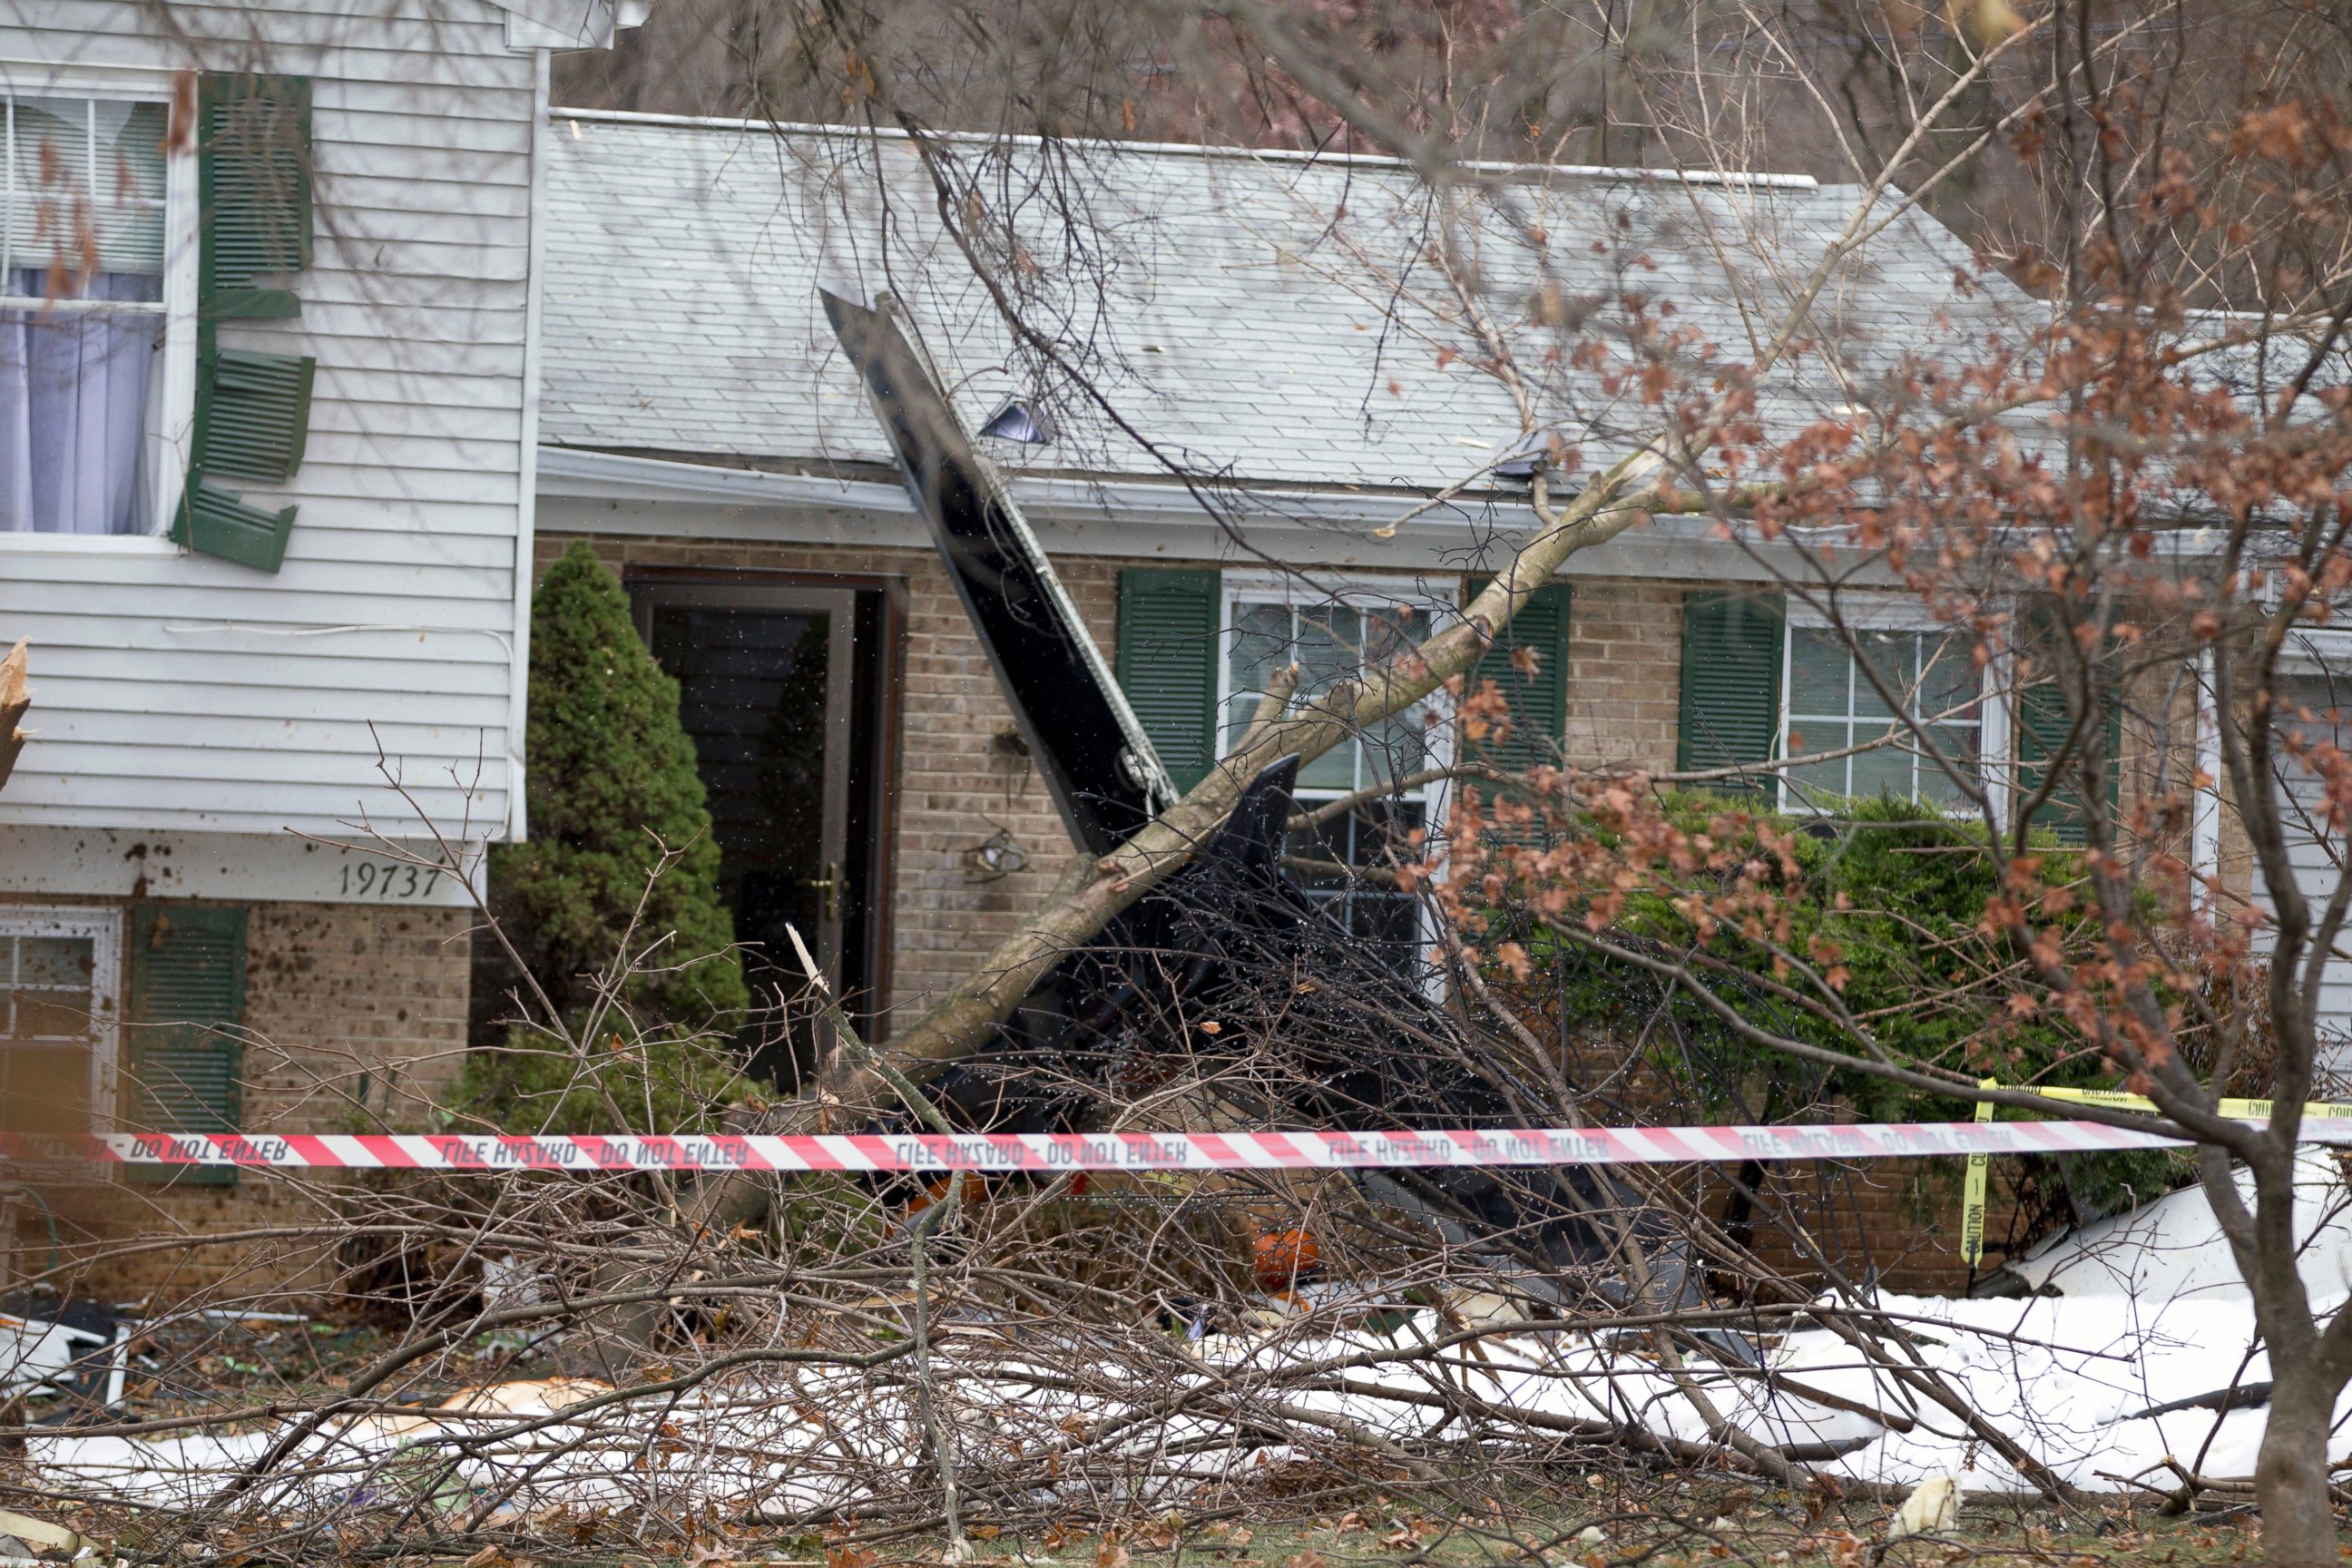 PHOTO: The wreckage of a small plane that crashed into a house in Gaithersburg, Md., Dec. 8, 2014.